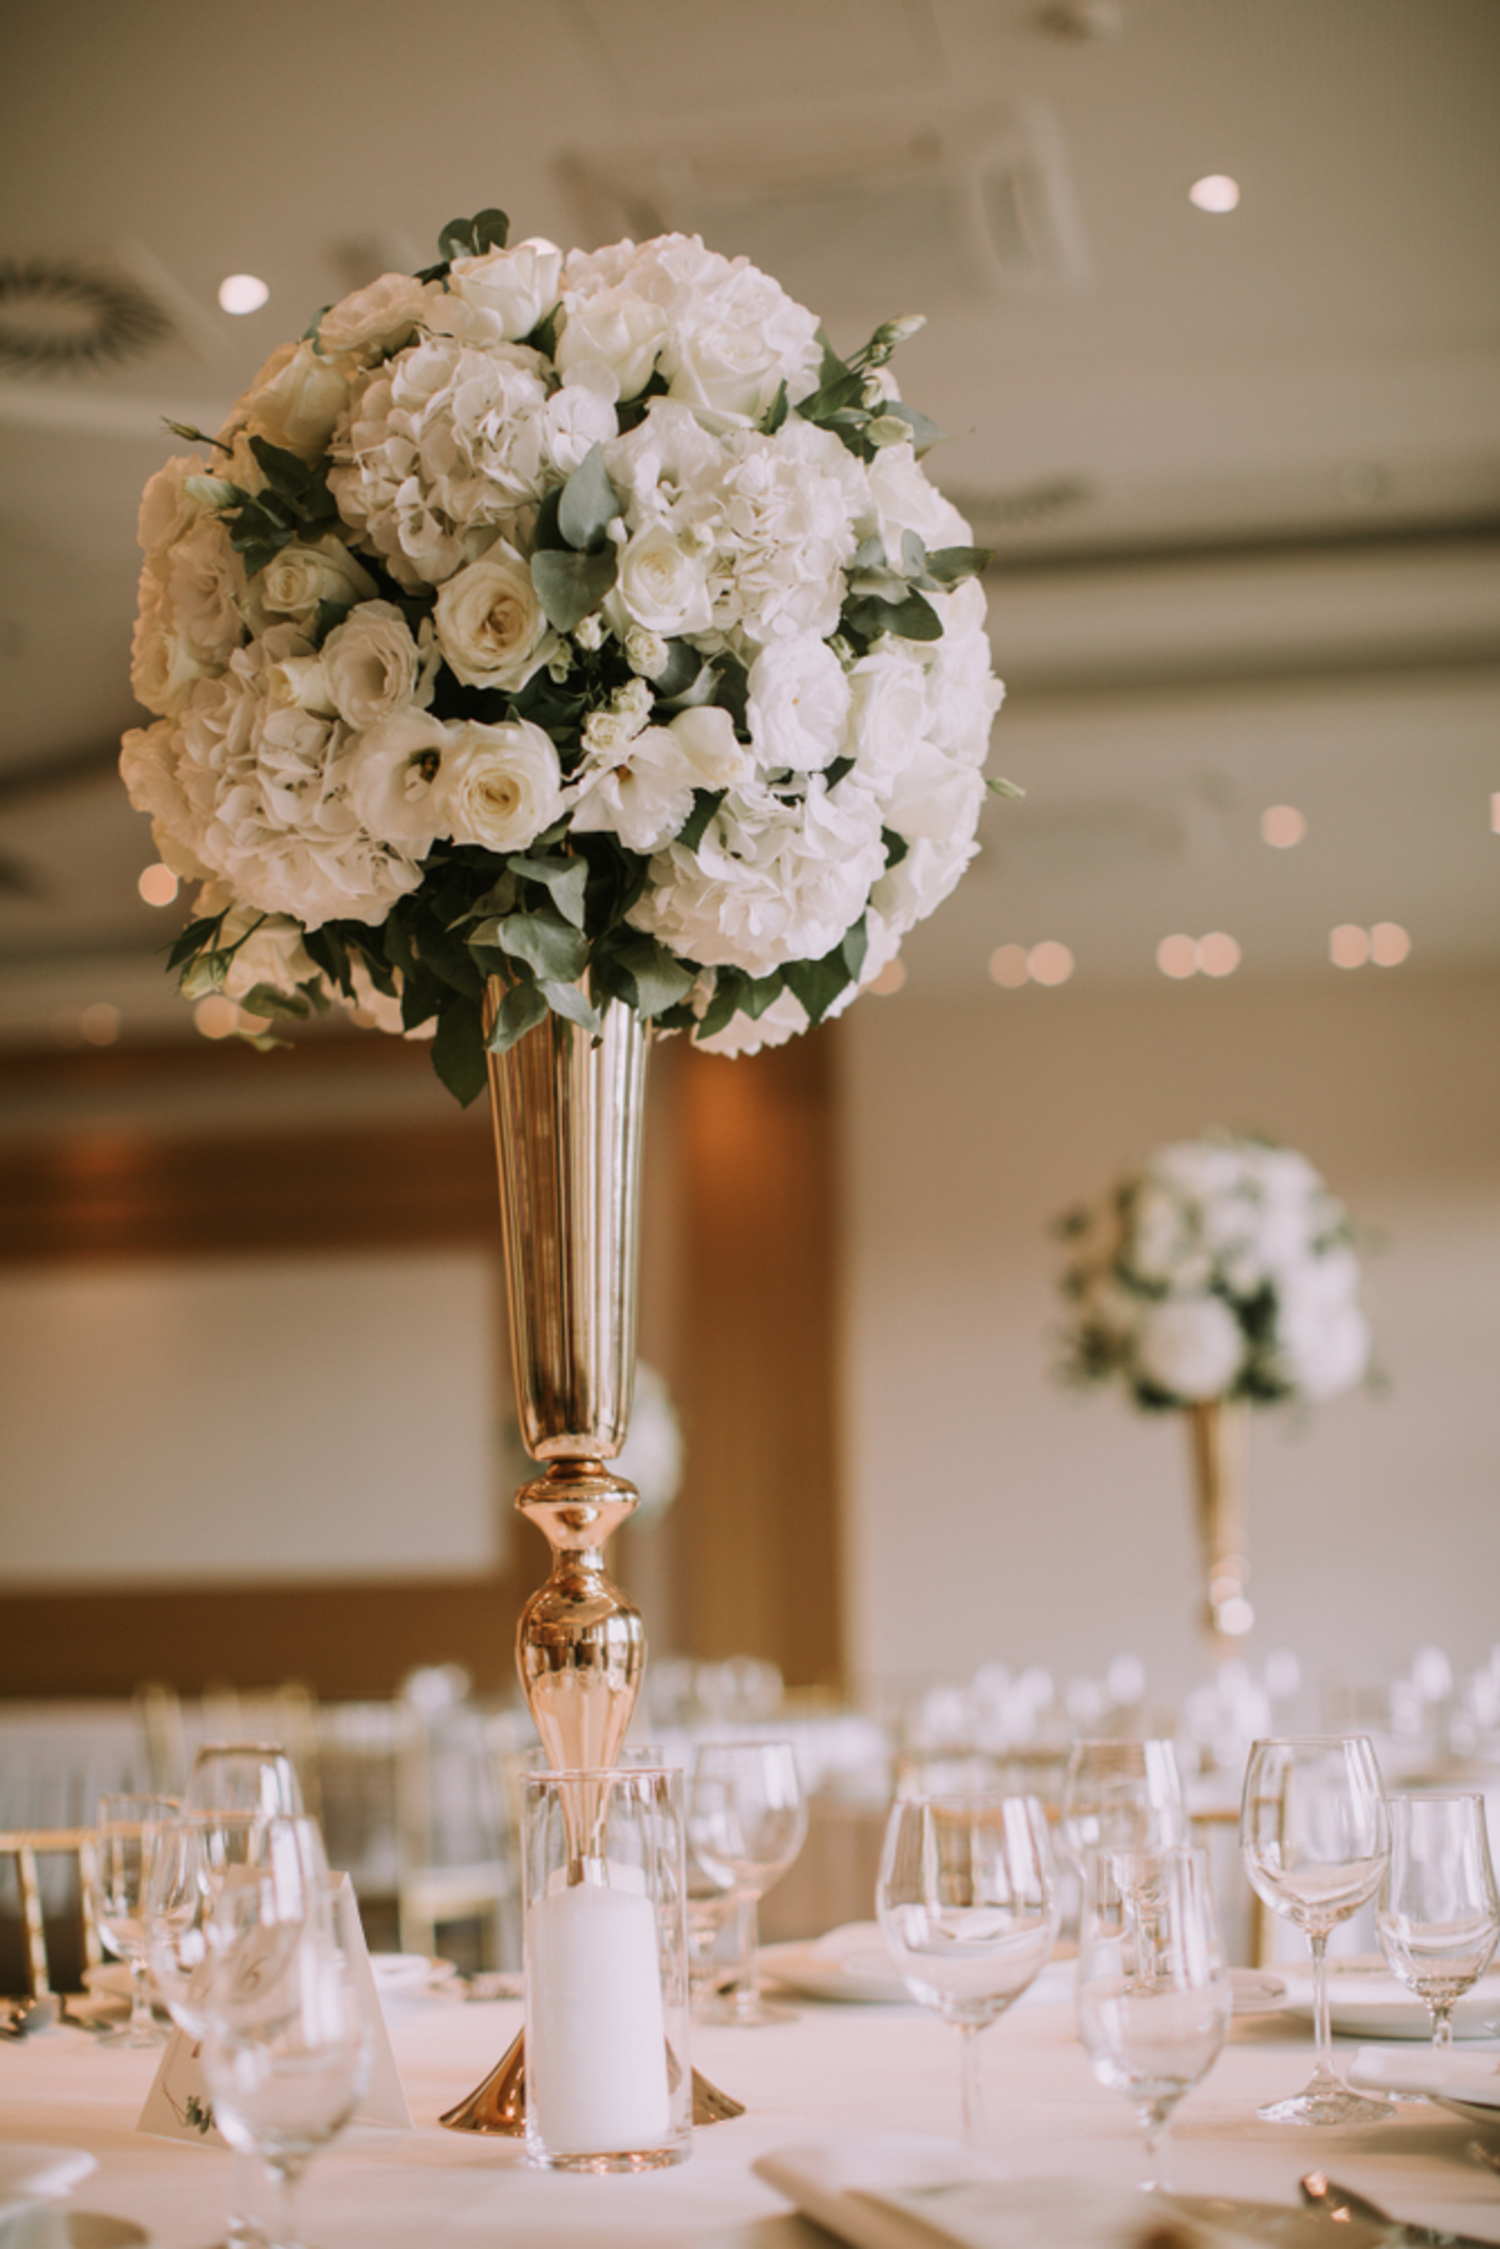 Wedding Table - Wedding Project Management in Gold Coast, QLD